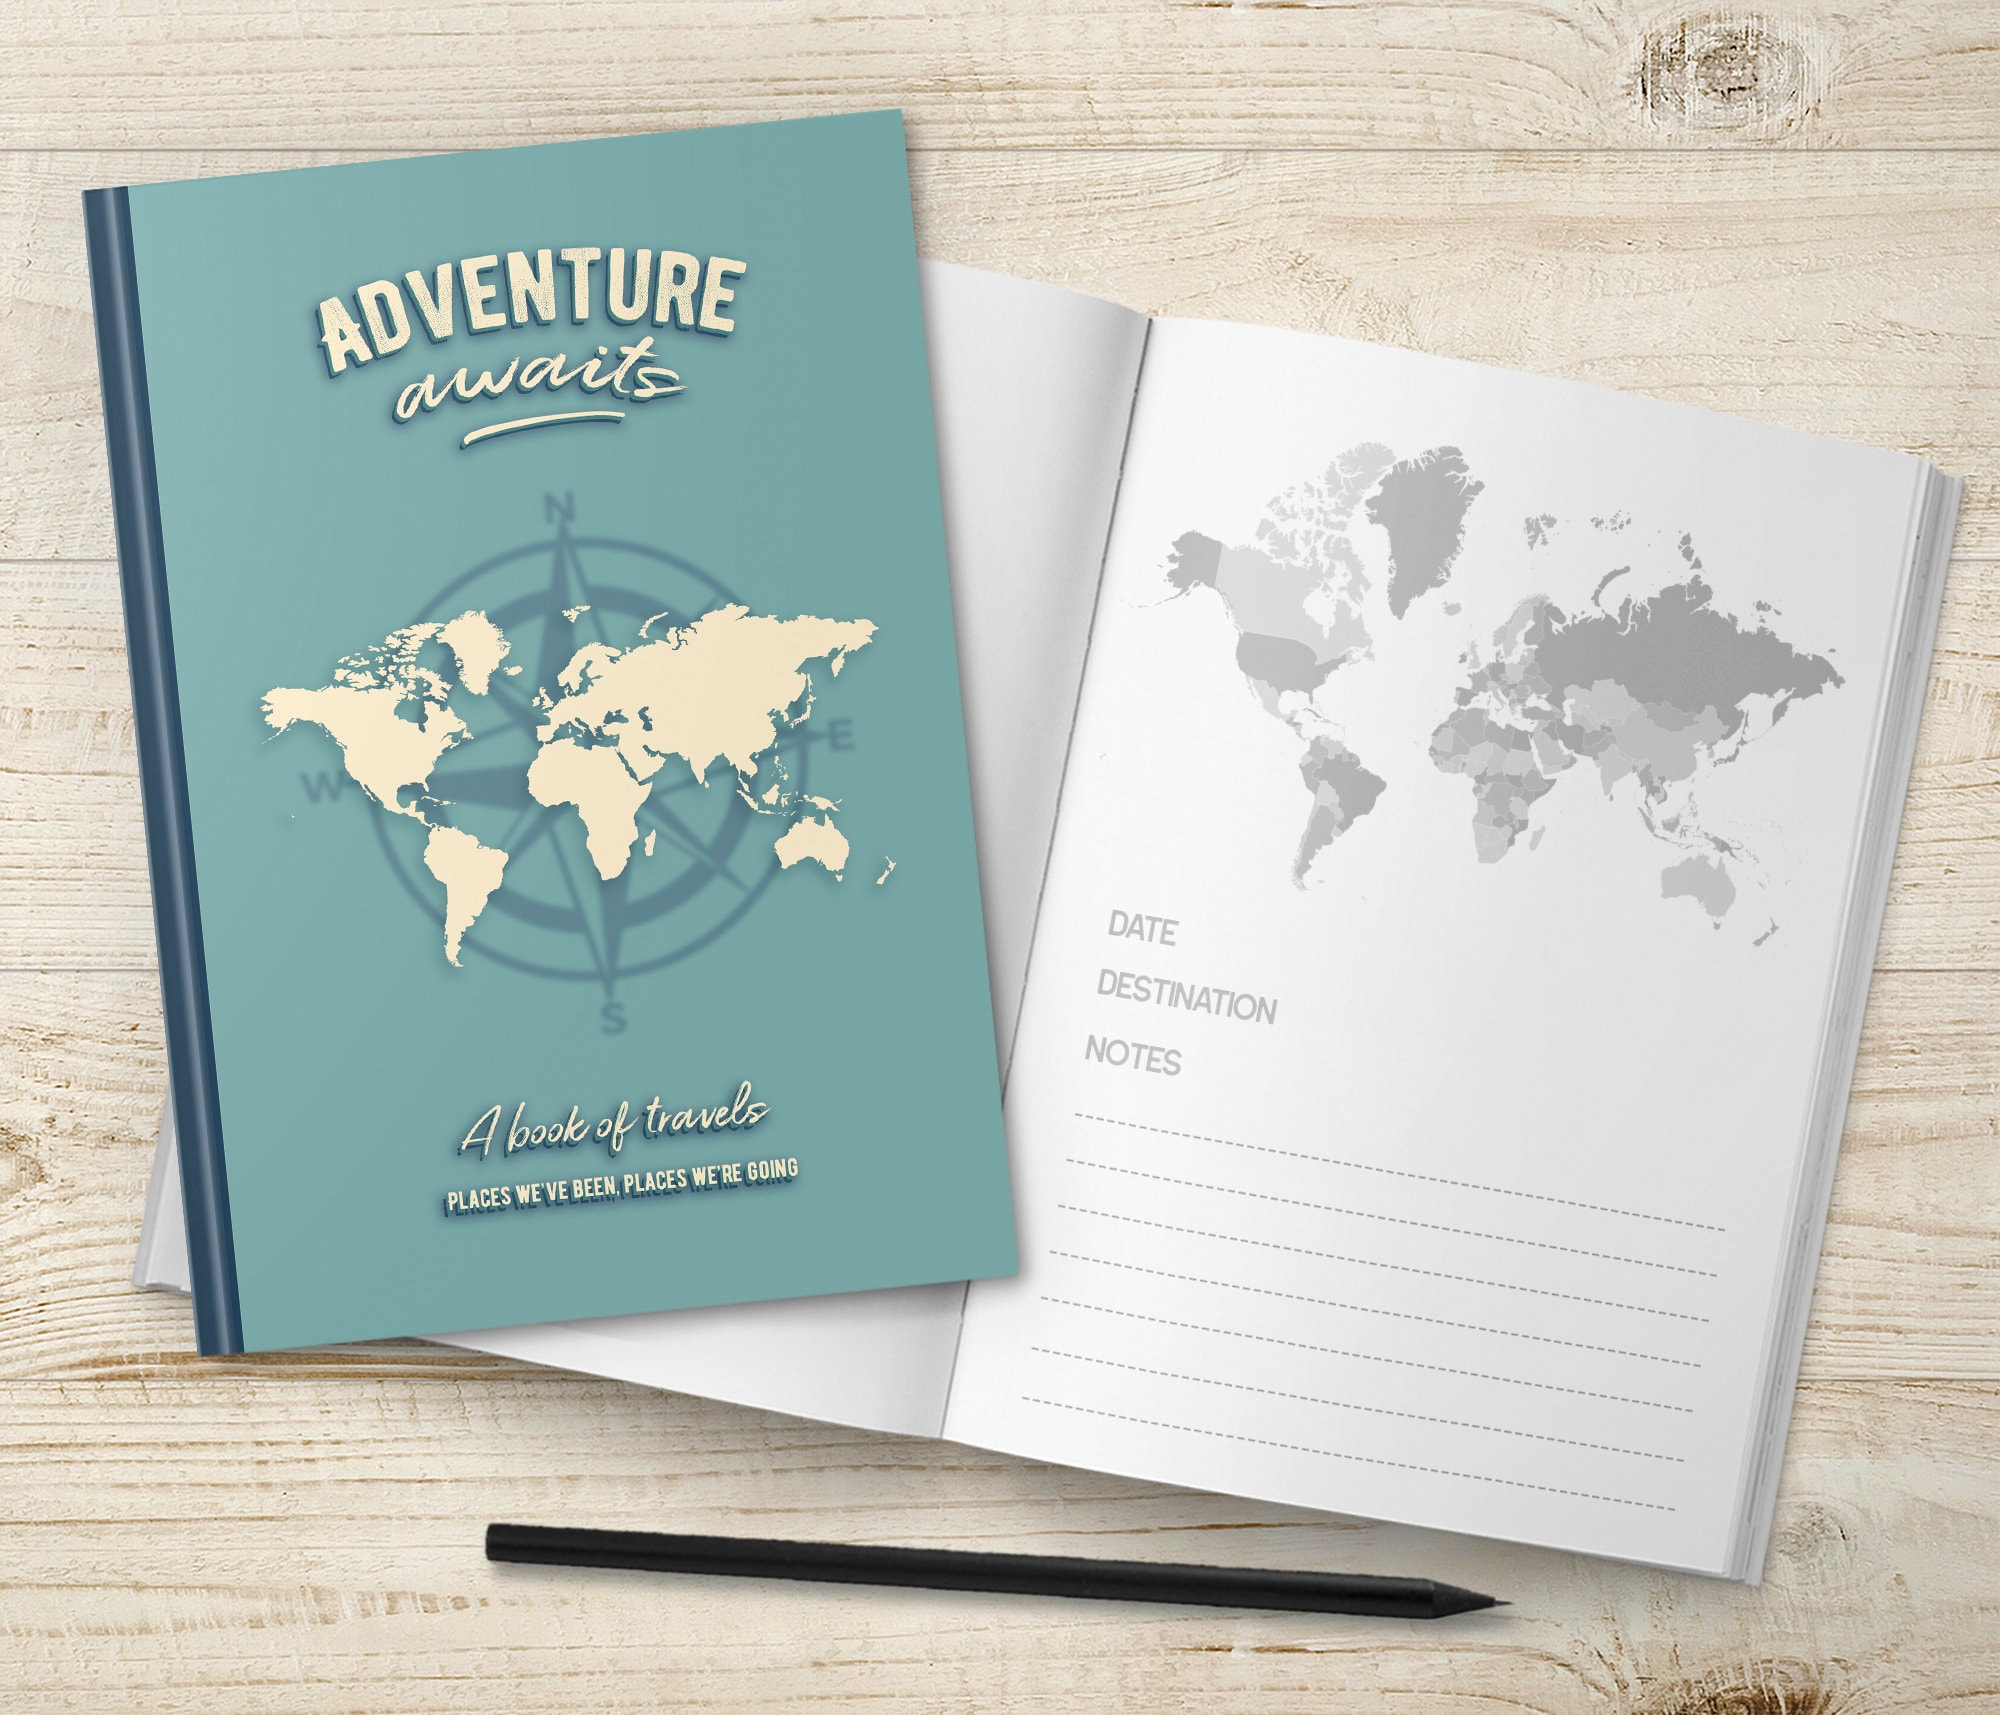 Bucket List, Travel Journal, Travel Notebook, Personalised Notebook, Travel  Gift, Places We're Going, Gold World Map, Our Adventures 